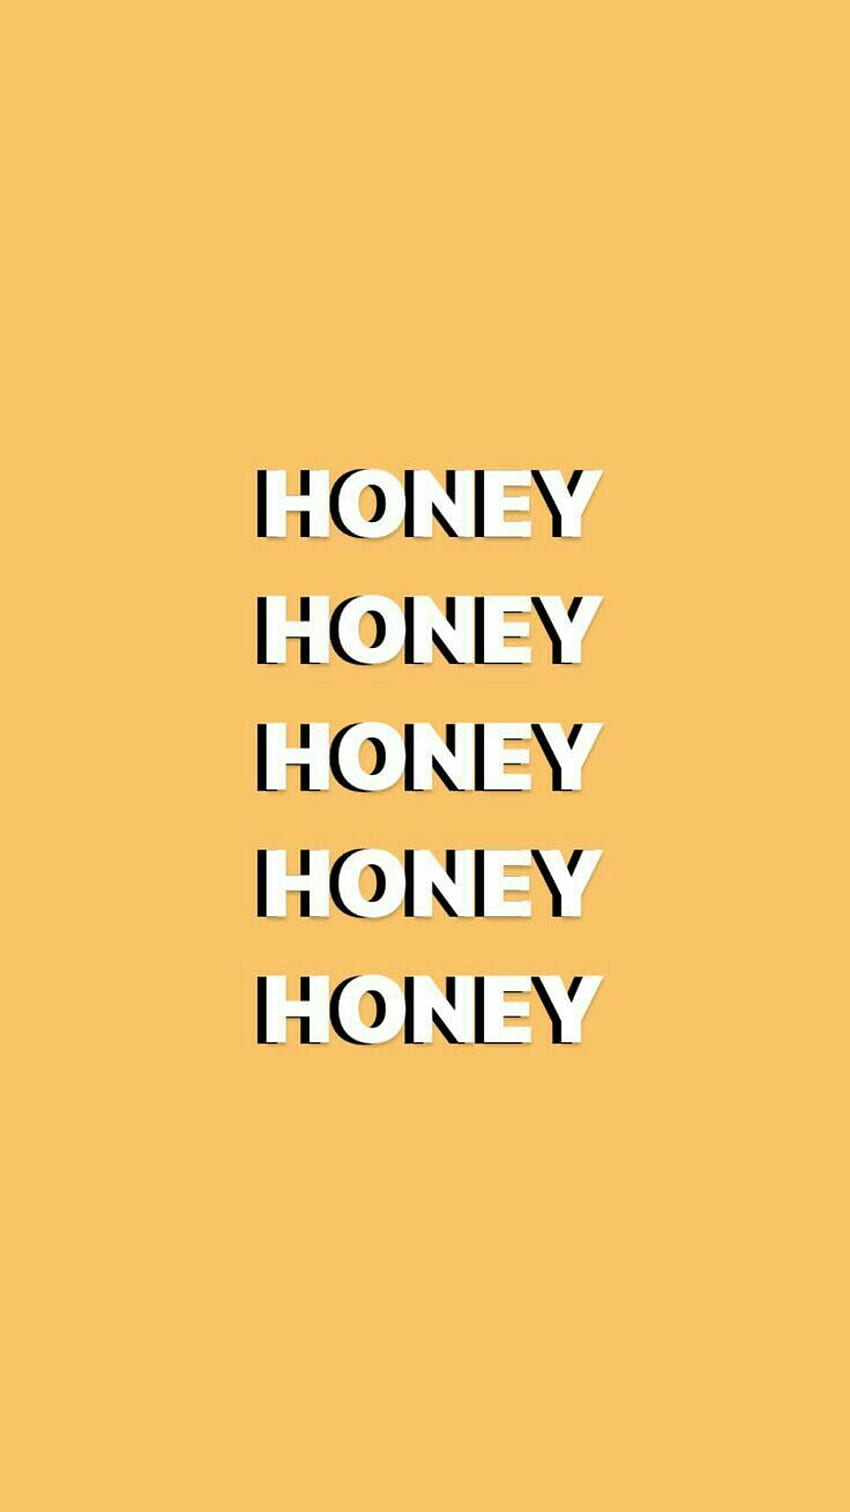 Yellow background with the word honey repeated in black and white - Honey